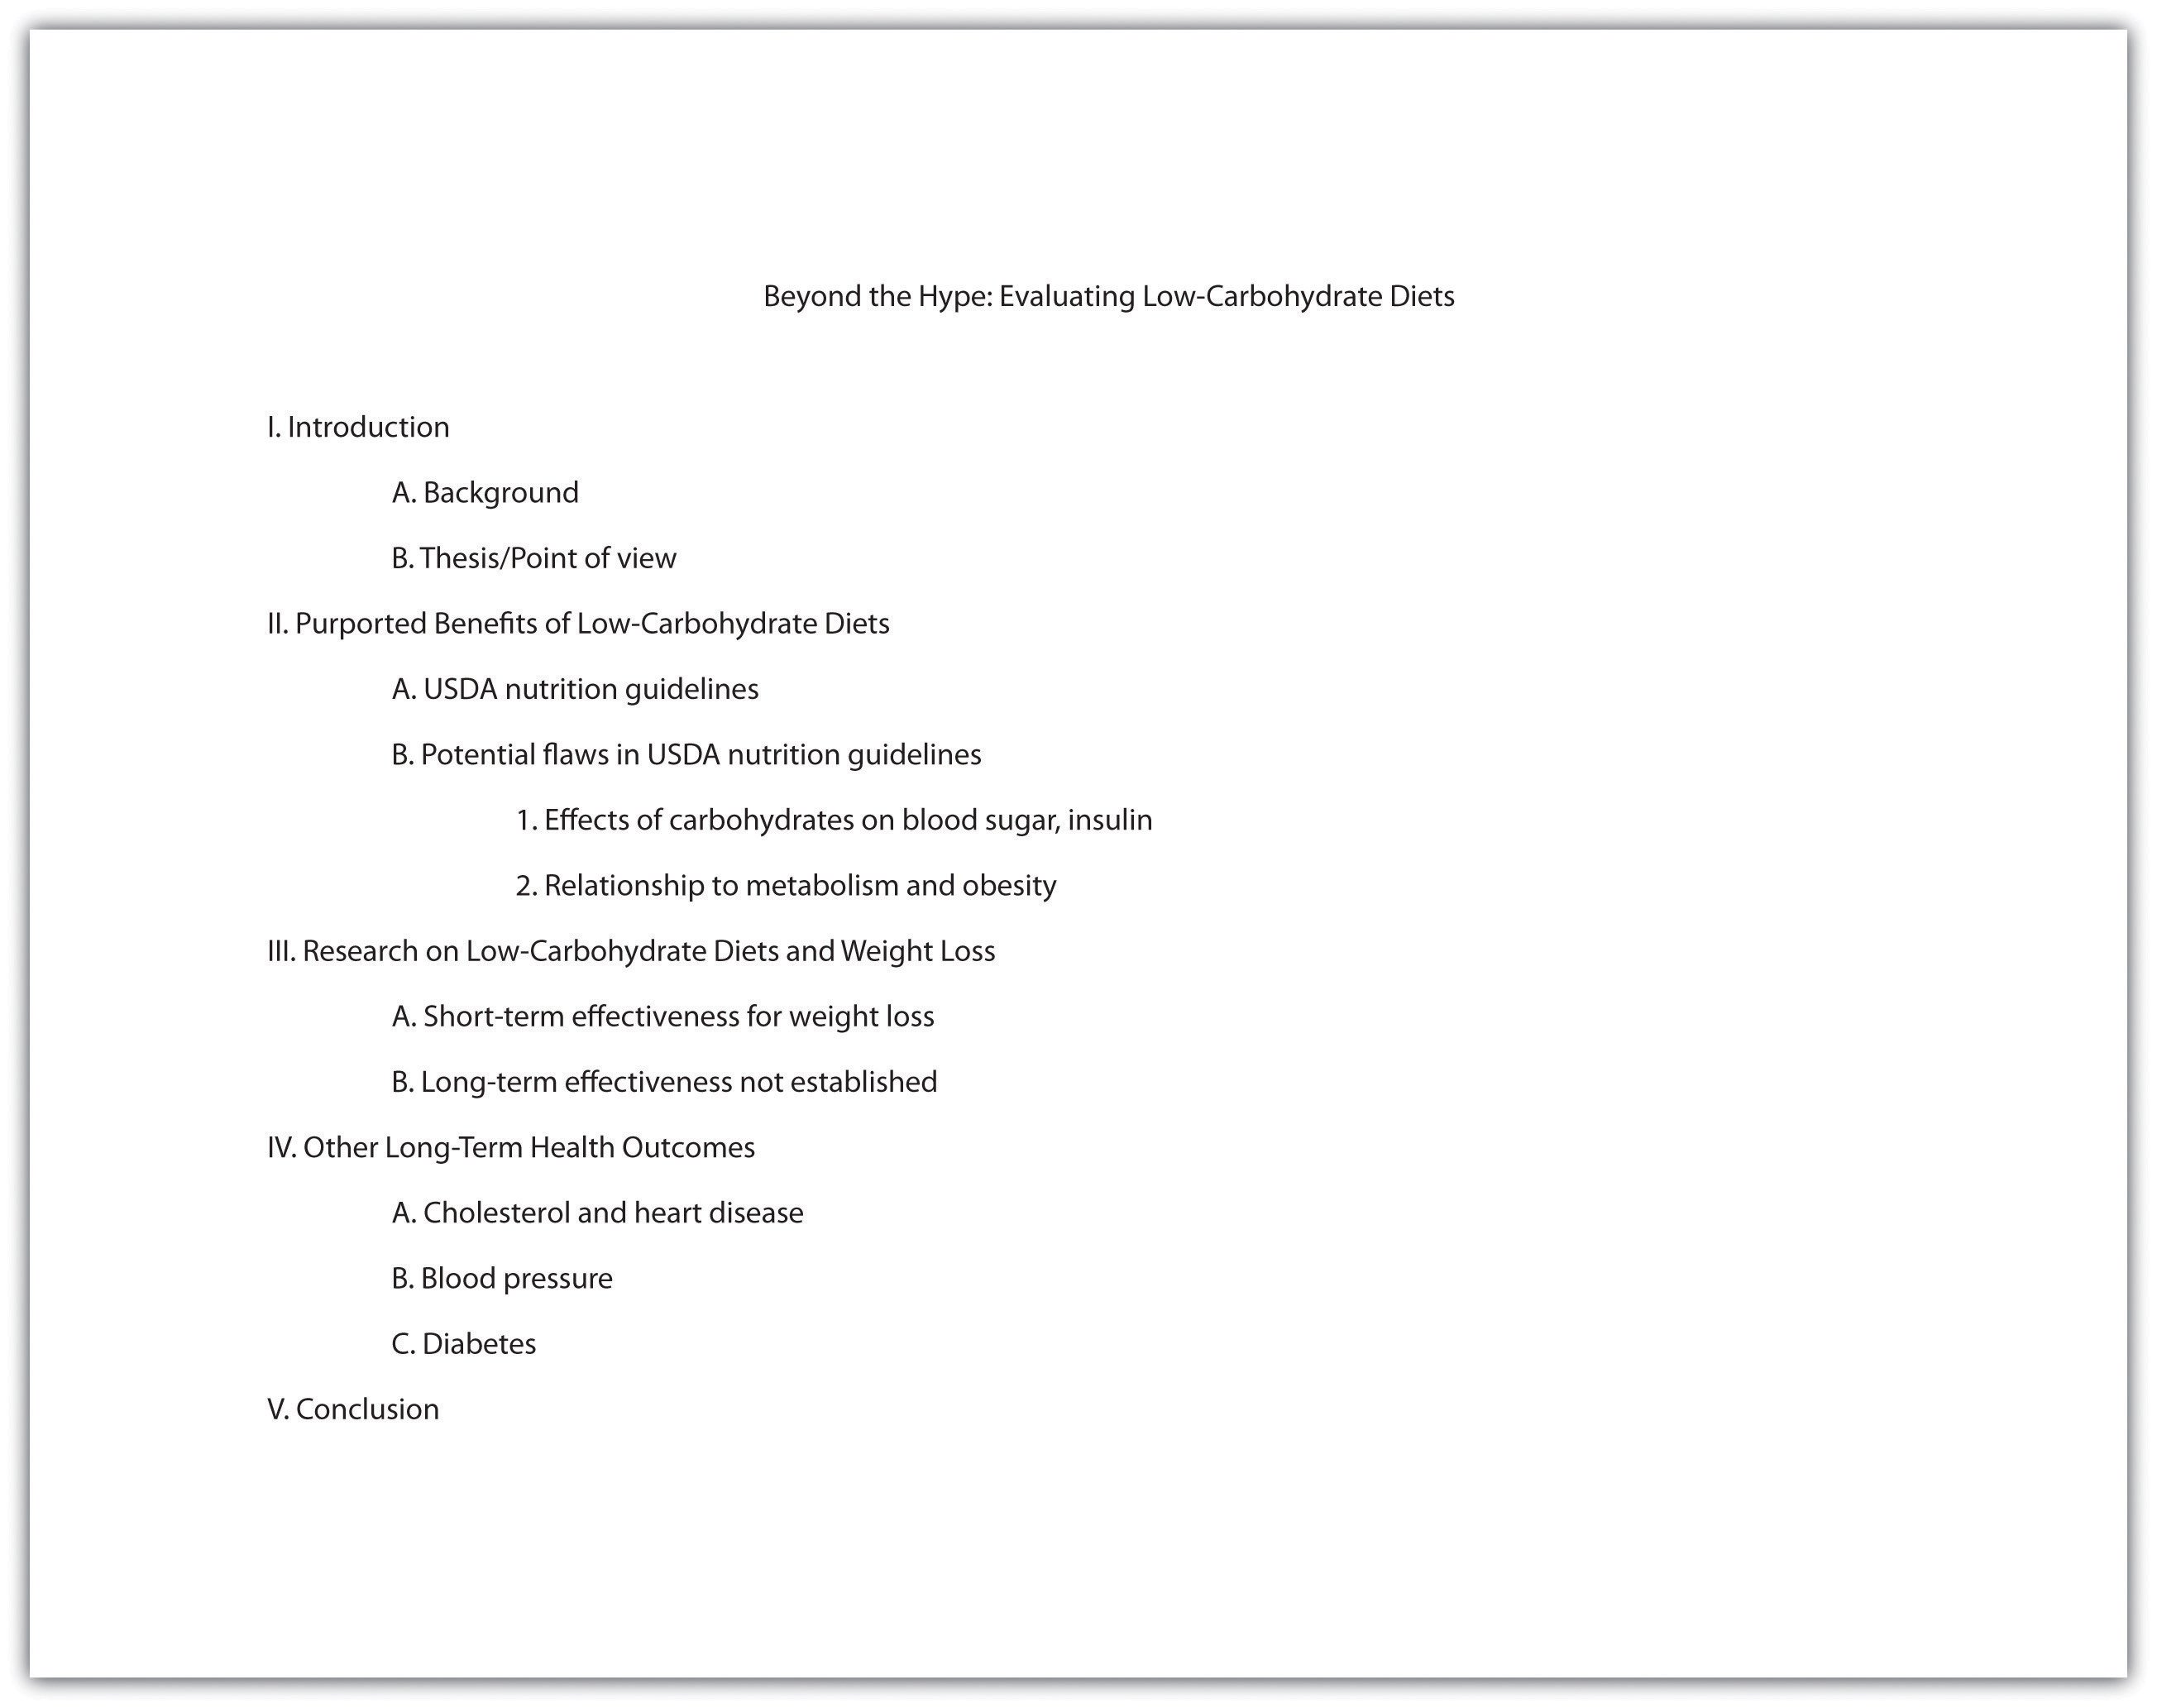 Powerpoint Presentation Outline Example Creating Presentations Sharing Your Ideas